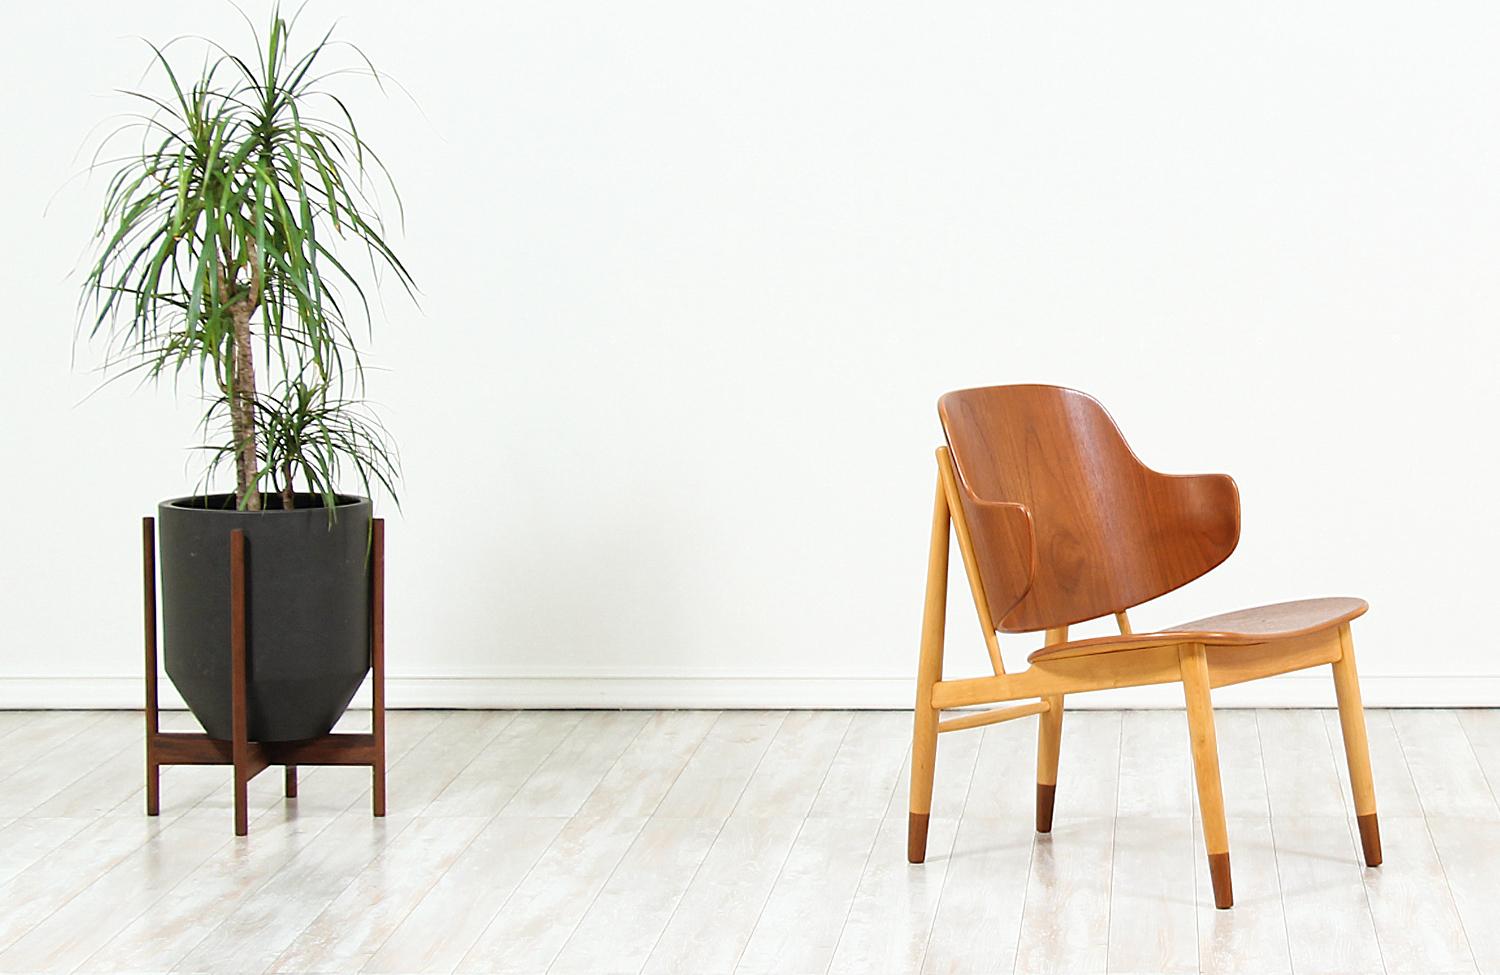 Beautiful modern shell chairs, crafted by Danish architect and furniture designer Ib-Kofod Larsen, and manufactured by Christensen & Larsen A/S in Denmark, circa 1950s. This spectacular design features a sturdy beech wood frame with mounted teak